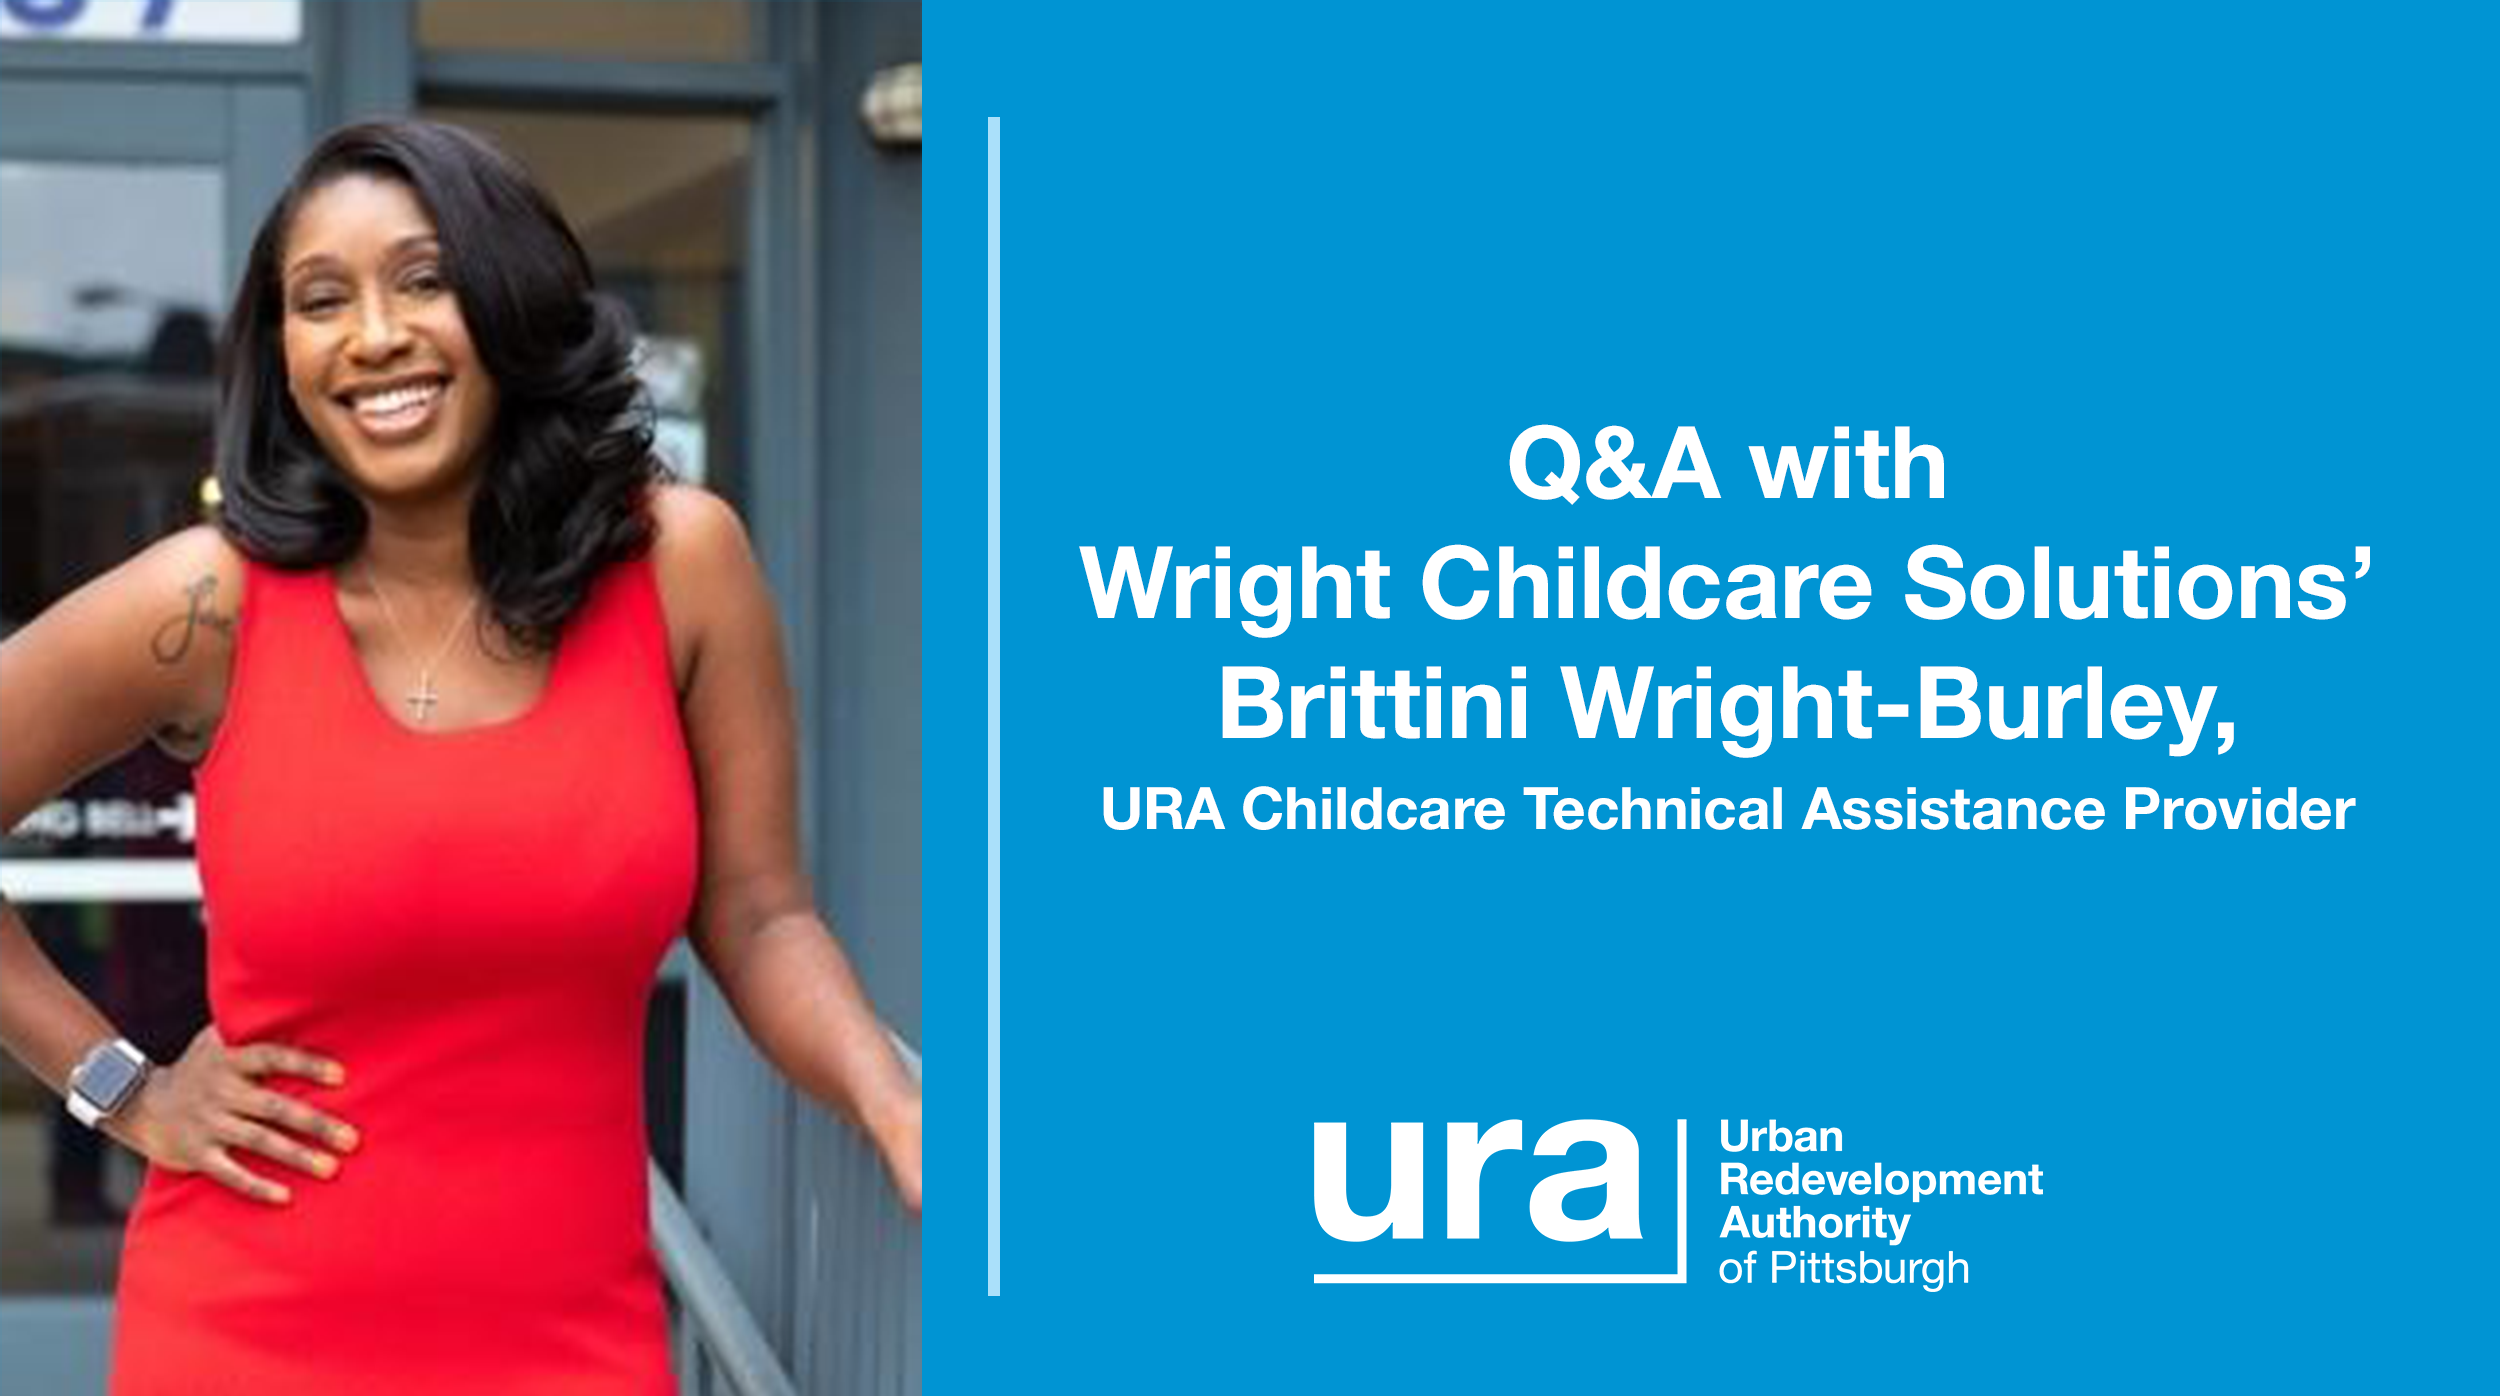 Wright Childcare Solutions Owner and Executive Director Brittini Wright-Burley